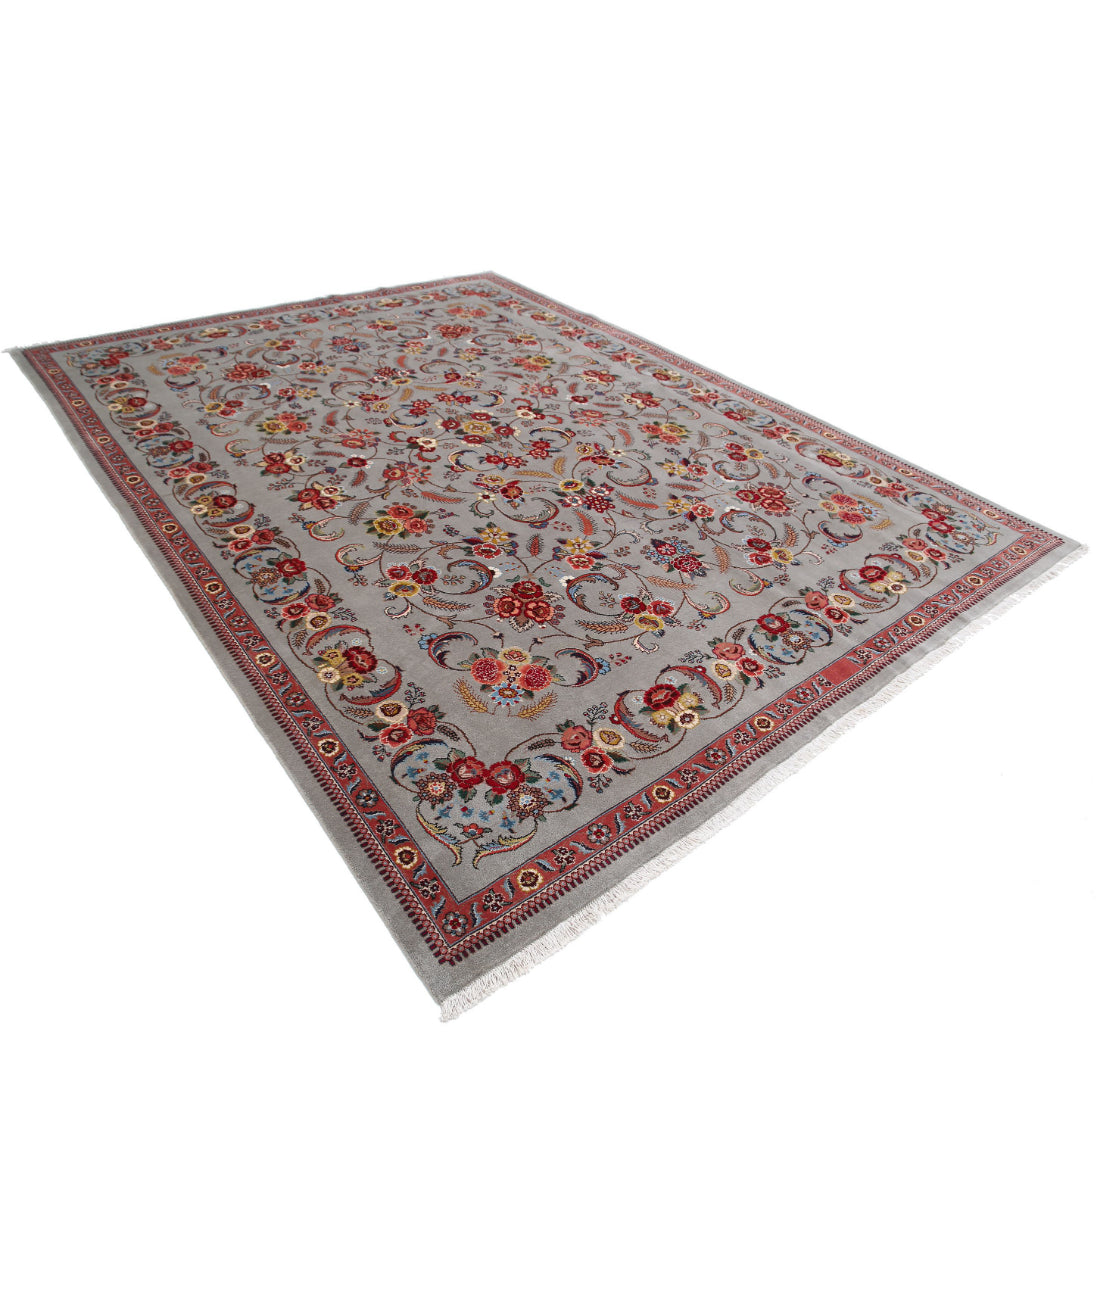 Hand Knotted Heritage Persian Style Wool Rug - 8'6'' x 11'3'' 8'6'' x 11'3'' (255 X 338) / Grey / Red